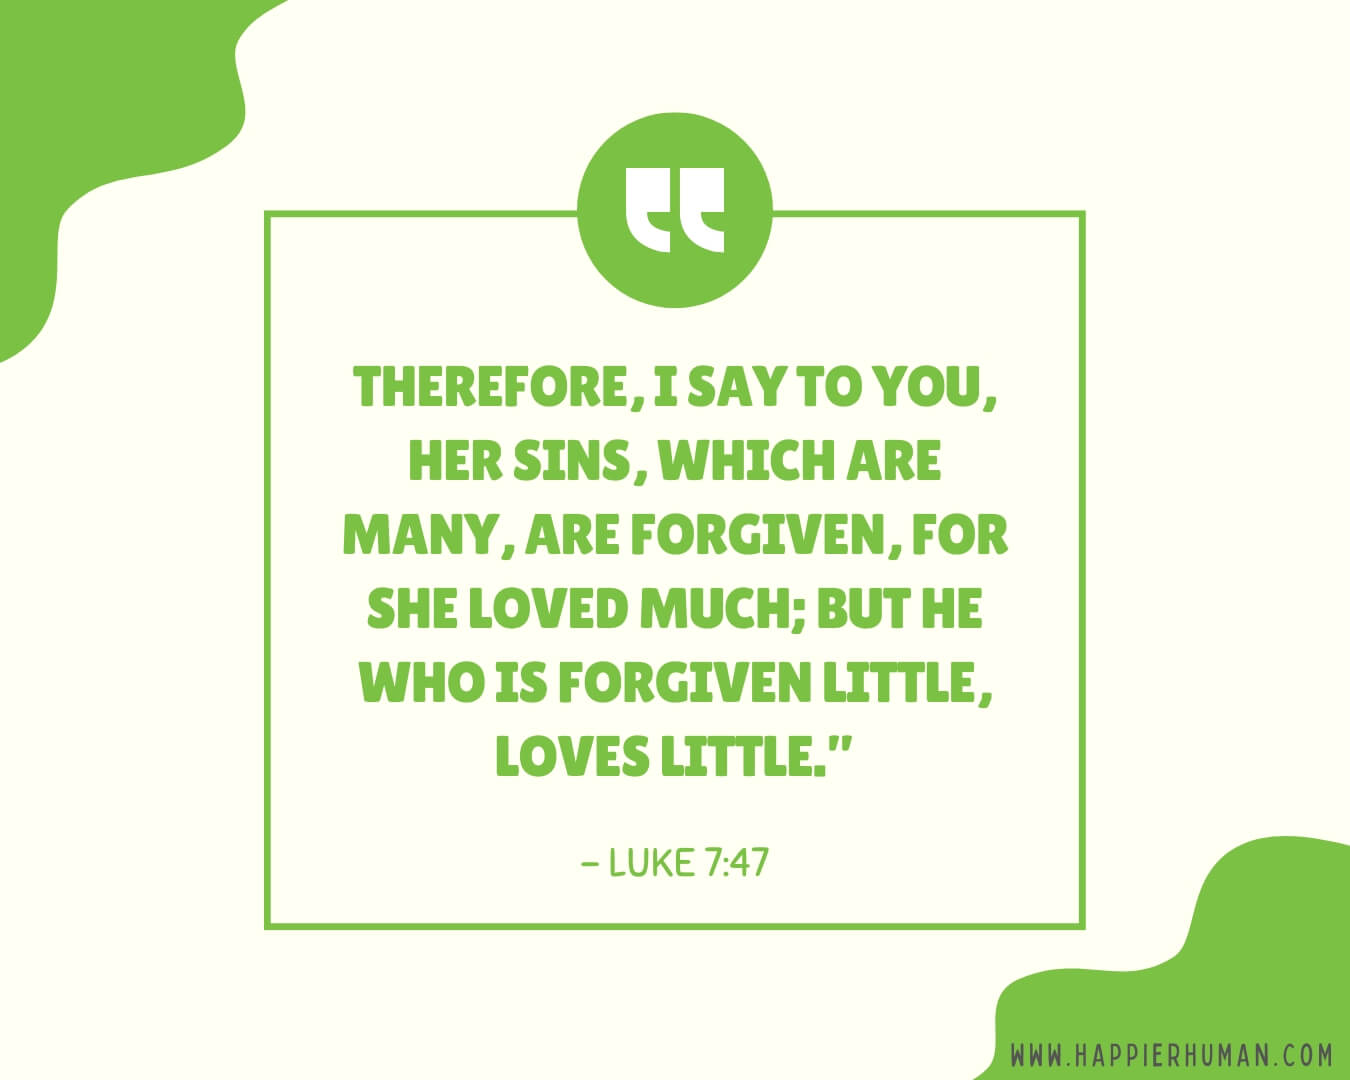 god's forgiveness verses | verses about forgiving others | bible verse about forgiveness